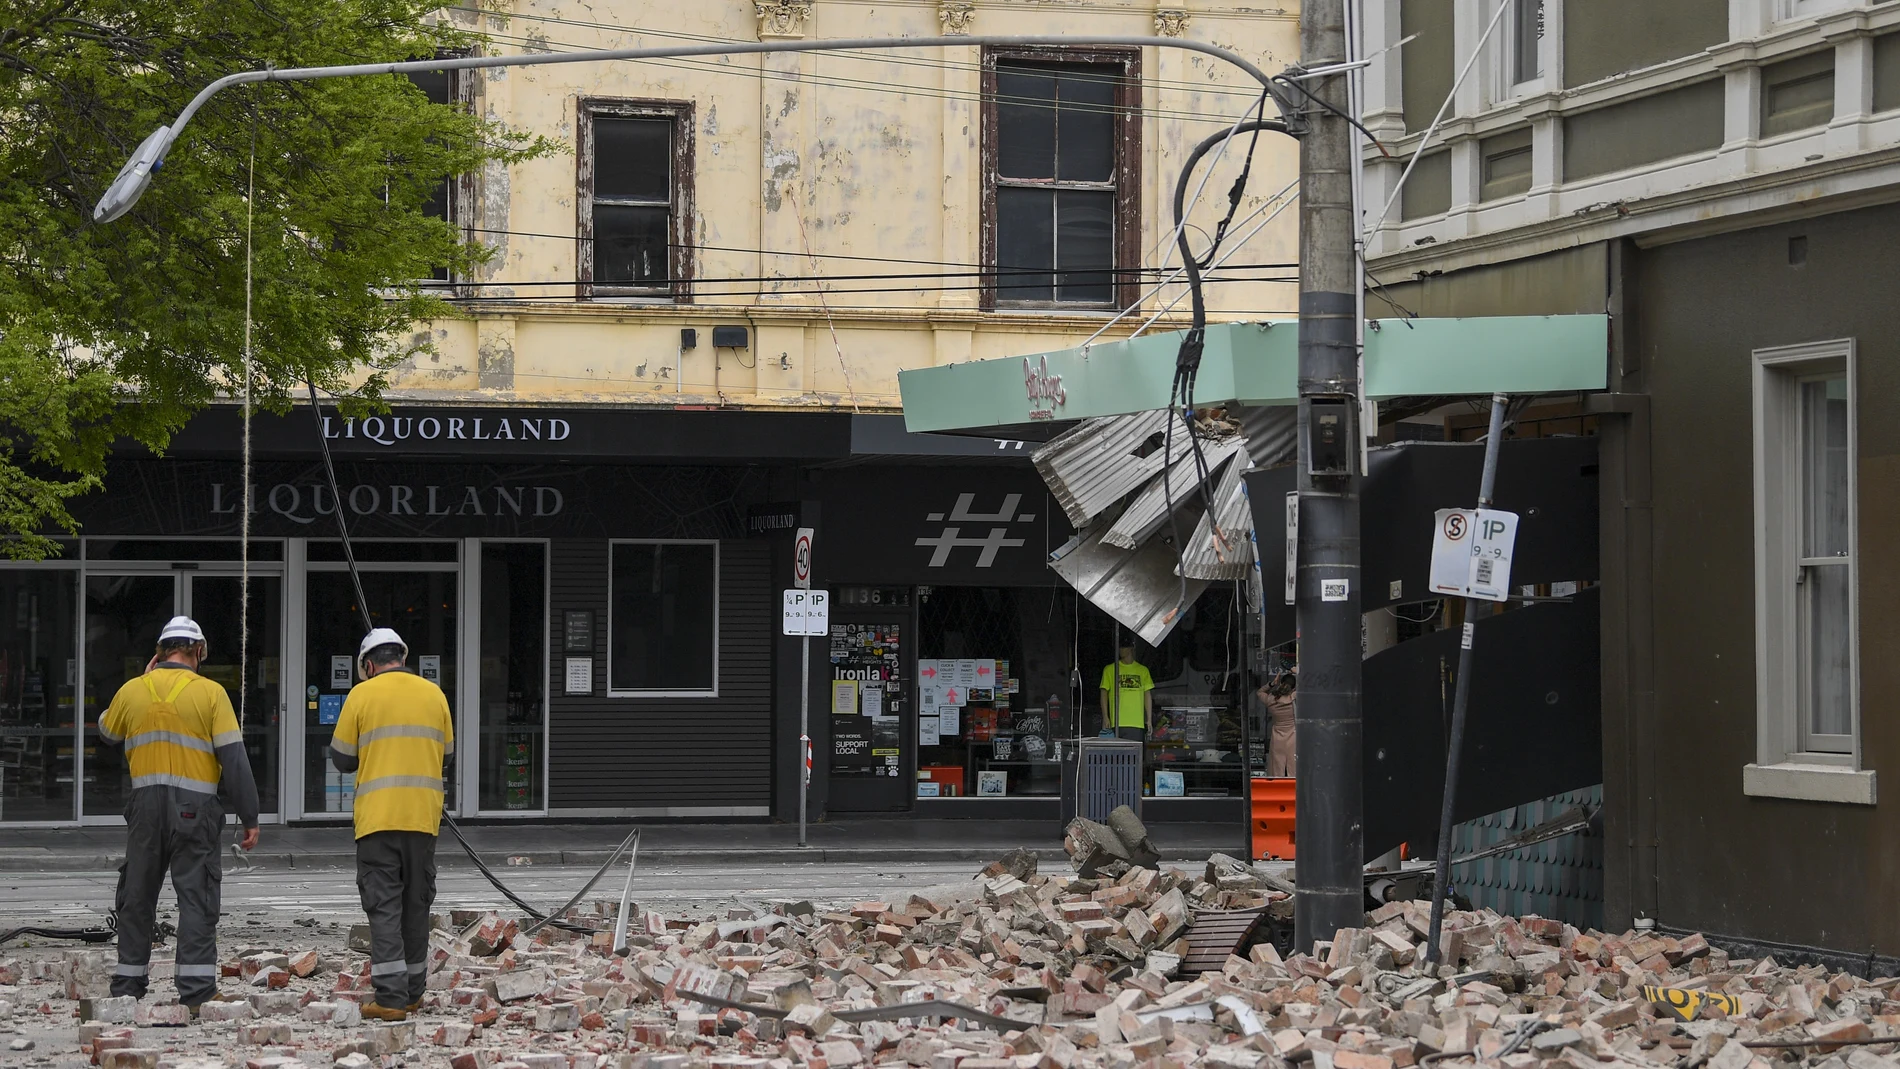 Emergency workers survey damage in Melbourne, Australia, where debris is scattered on a road after part of a wall fell from a building during an earthquake, Wednesday, Sept. 22, 2021. A strong earthquake caused damage in the city of Melbourne in an unusually powerful temblor for Australia, Geoscience Australia said. (James Ross/AAP Image via AP)